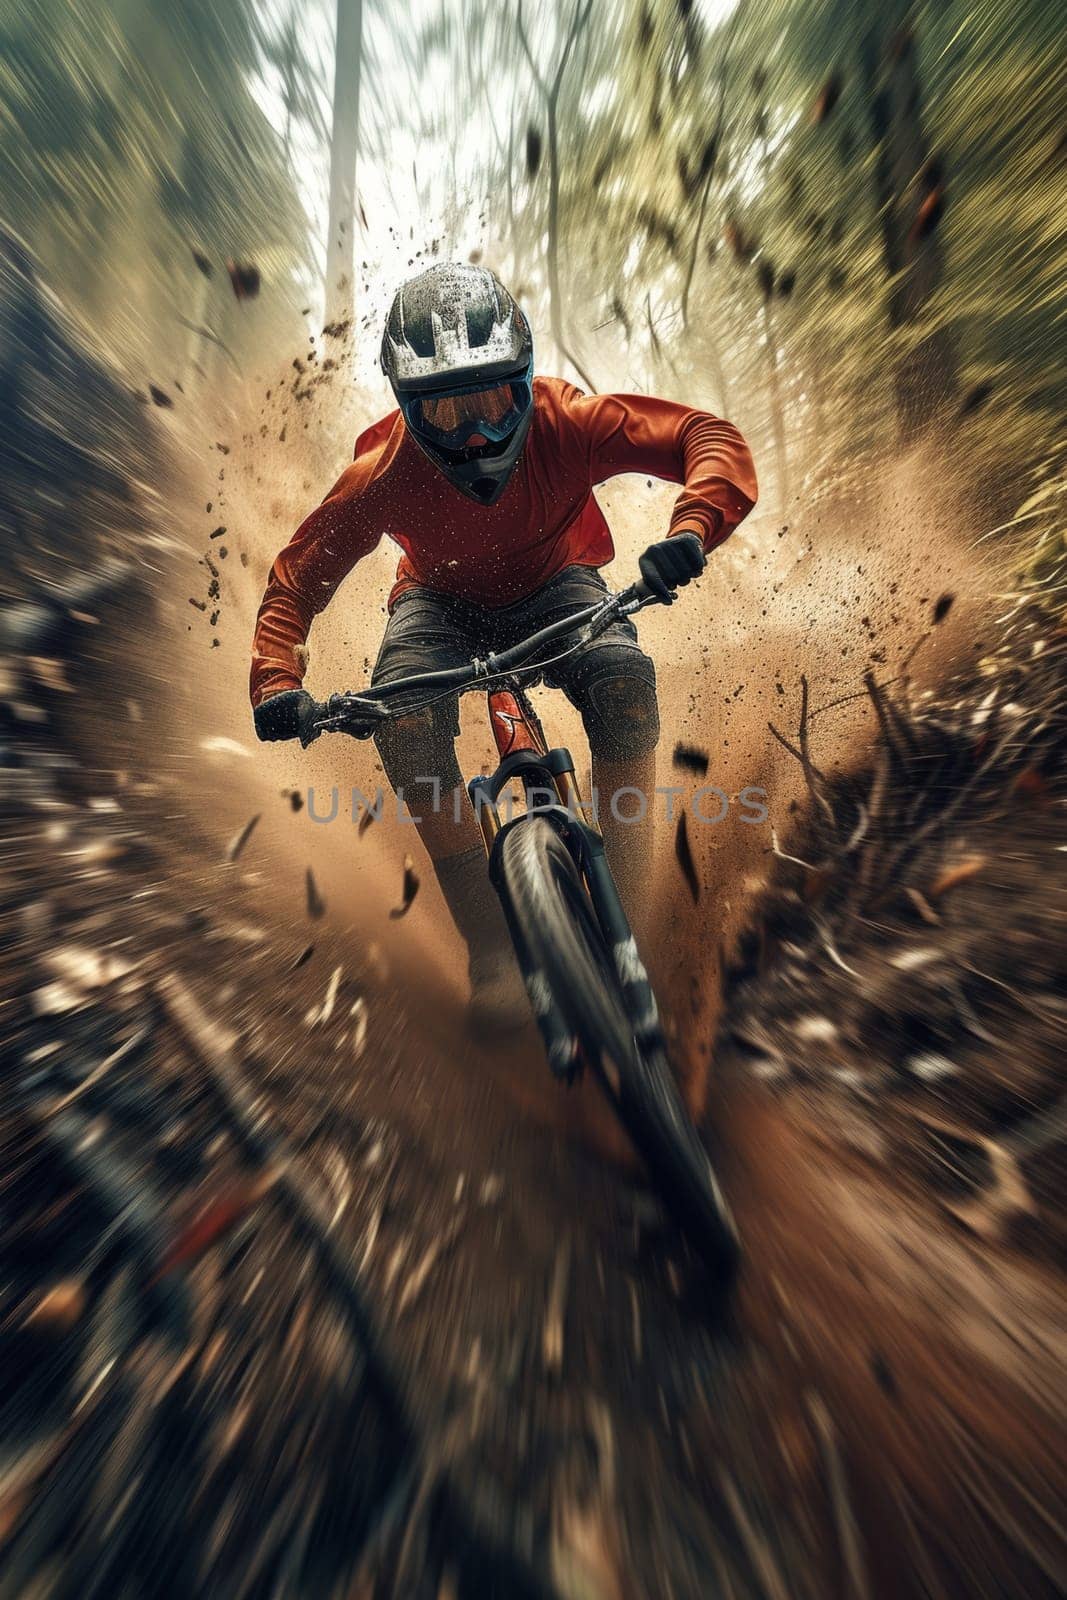 Mountain biker in action, speeding down a dirt trail in a sun-dappled forest, showcasing dynamic motion and sport. by sfinks